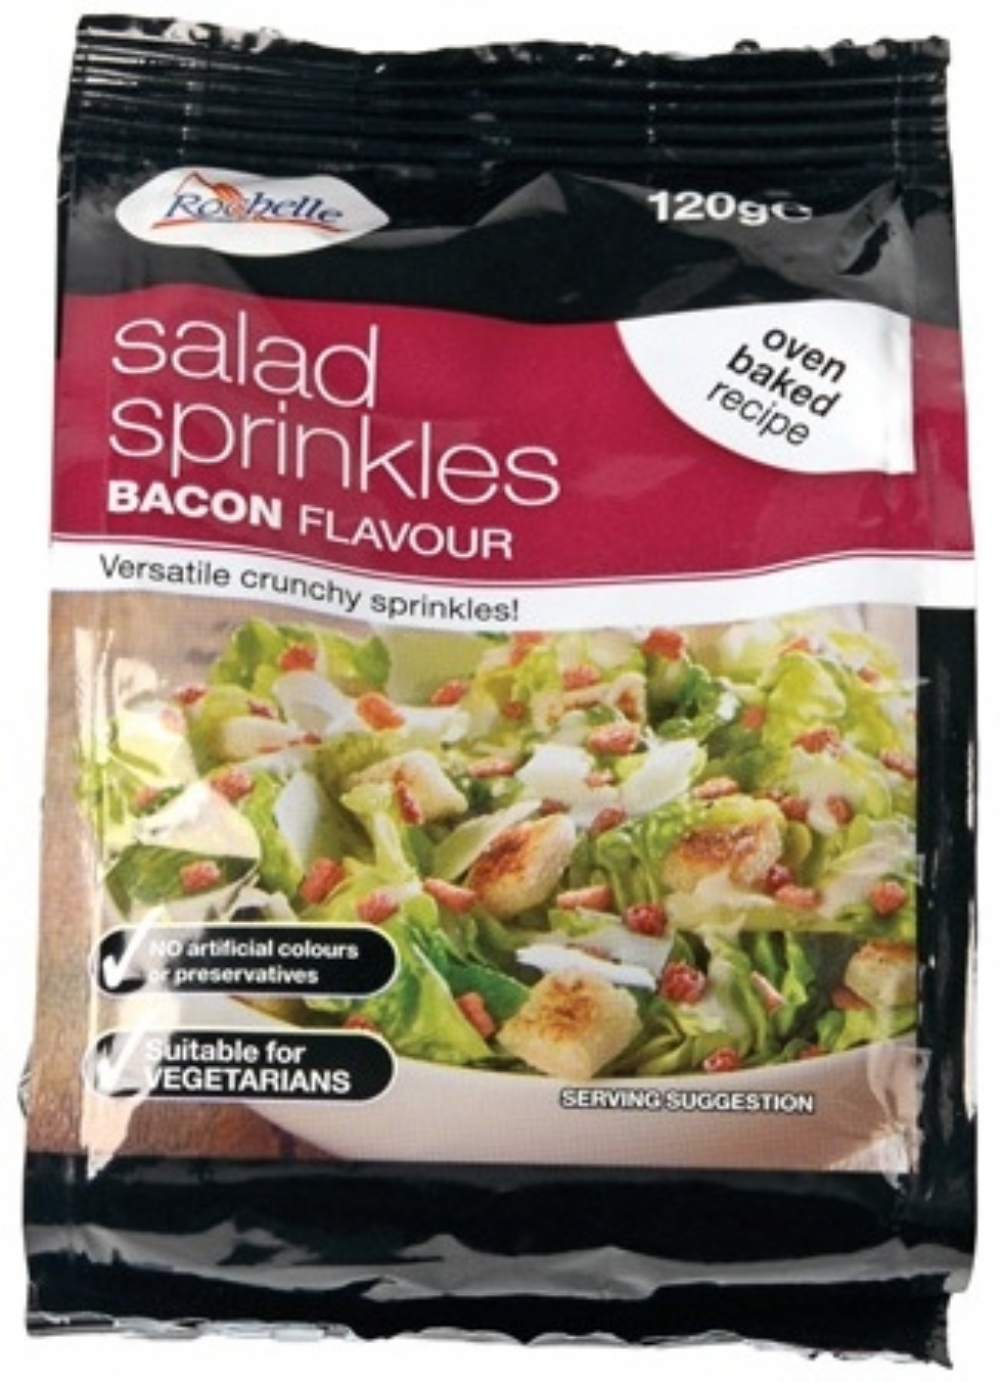 ROCHELLE Salad Sprinkles Bacon Flavour 120g